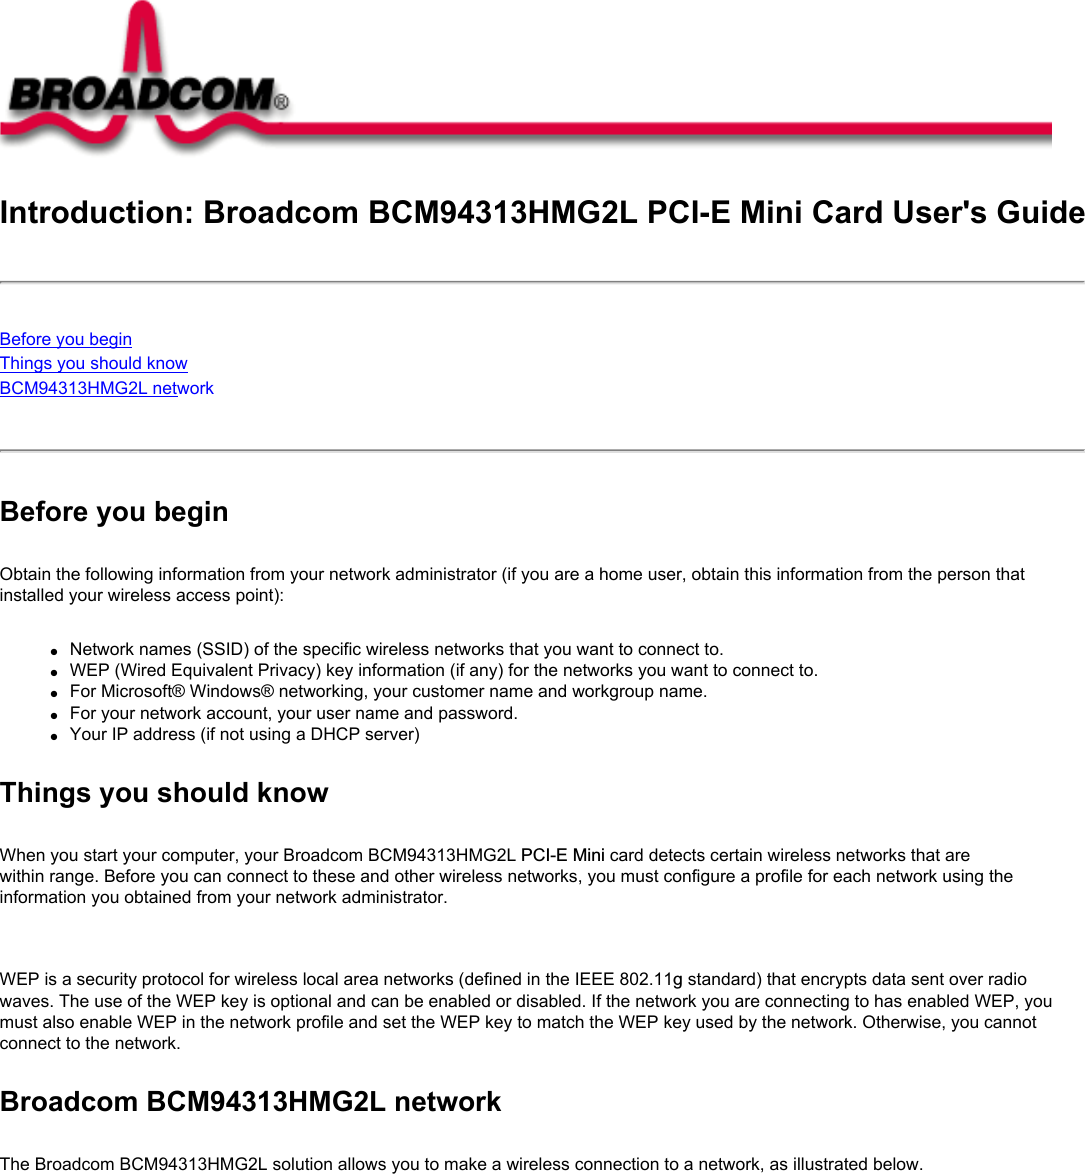 Introduction: Broadcom BCM94313HMG2L PCI-E Mini Card User&apos;s GuideBefore you beginThings you should knowBCM94313HMG2L network Before you beginObtain the following information from your network administrator (if you are a home user, obtain this information from the person that installed your wireless access point):●     Network names (SSID) of the specific wireless networks that you want to connect to.●     WEP (Wired Equivalent Privacy) key information (if any) for the networks you want to connect to.●     For Microsoft® Windows® networking, your customer name and workgroup name.●     For your network account, your user name and password.●     Your IP address (if not using a DHCP server)Things you should knowWhen you start your computer, your Broadcom BCM94313HMG2L PCI-E Mini card detects certain wireless networks that are within range. Before you can connect to these and other wireless networks, you must configure a profile for each network using the information you obtained from your network administrator.   WEP is a security protocol for wireless local area networks (defined in the IEEE 802.11g standard) that encrypts data sent over radio waves. The use of the WEP key is optional and can be enabled or disabled. If the network you are connecting to has enabled WEP, you must also enable WEP in the network profile and set the WEP key to match the WEP key used by the network. Otherwise, you cannot connect to the network.Broadcom BCM94313HMG2L networkThe Broadcom BCM94313HMG2L solution allows you to make a wireless connection to a network, as illustrated below.